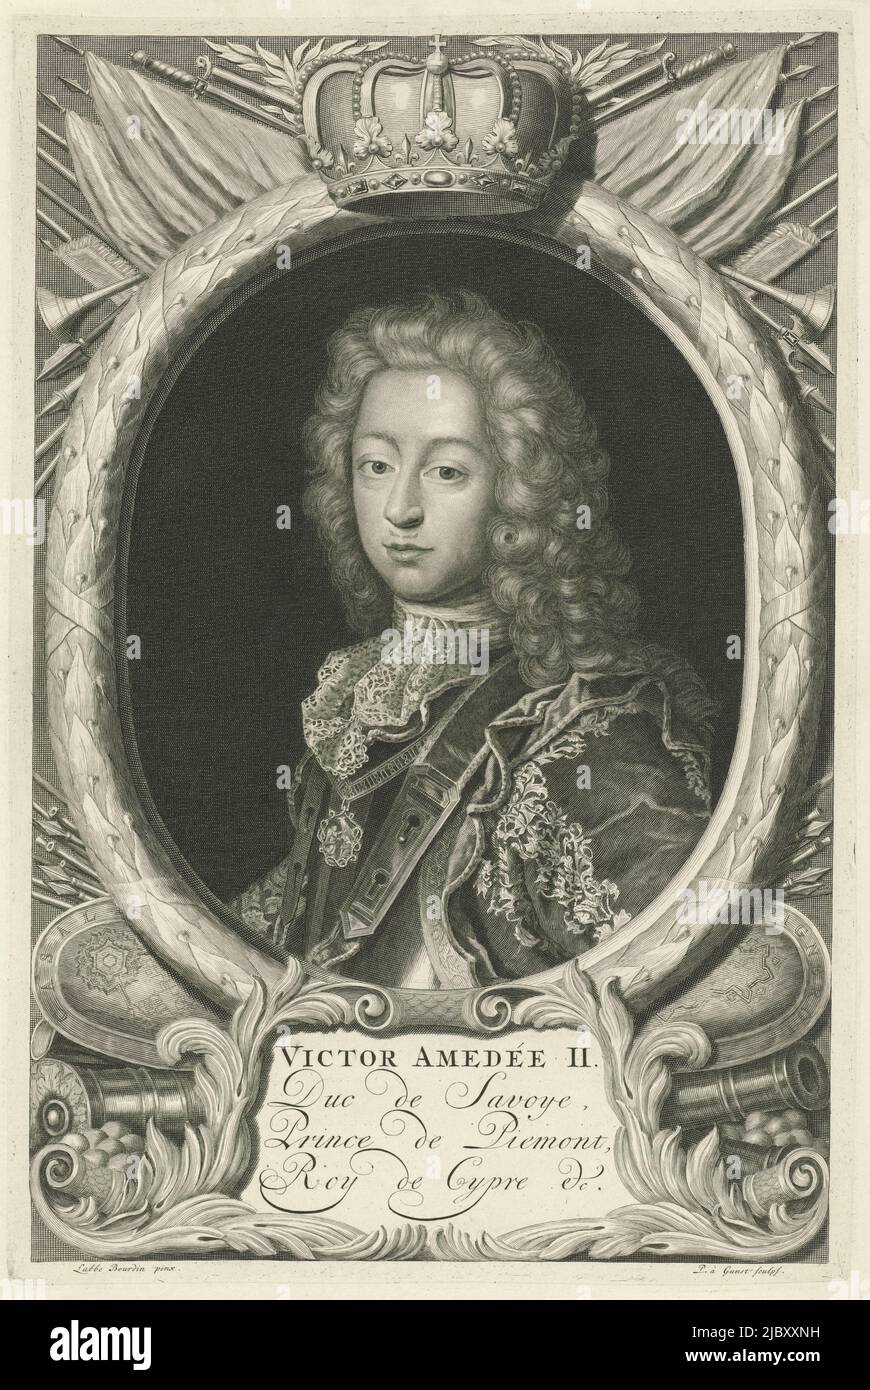 Victor Amadeus II, Duke of Savoy, Portrait of Victor Amadeus II, Duke of Savoy, print maker: Pieter van Gunst, (mentioned on object), after: Labbe Bourdin, (mentioned on object), Amsterdam, 1675 - 1731, paper, engraving, w 258 mm × h 387 mm Stock Photo